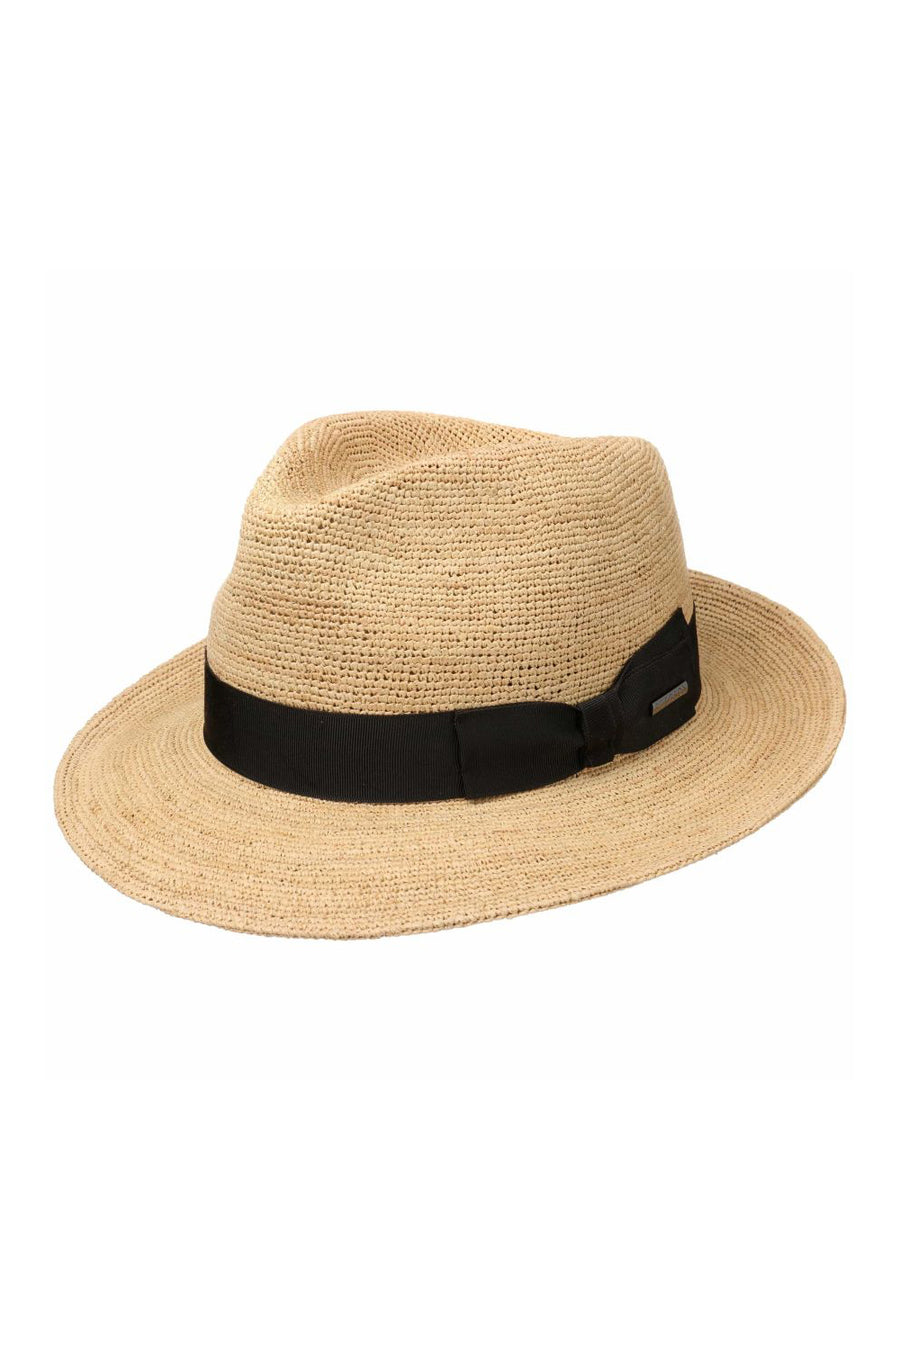 Buy the Stetson Jenkins Crochet Fedora Straw Hat in Black/Beige at Intro. Spend £50 for free UK delivery. Official stockists. We ship worldwide.